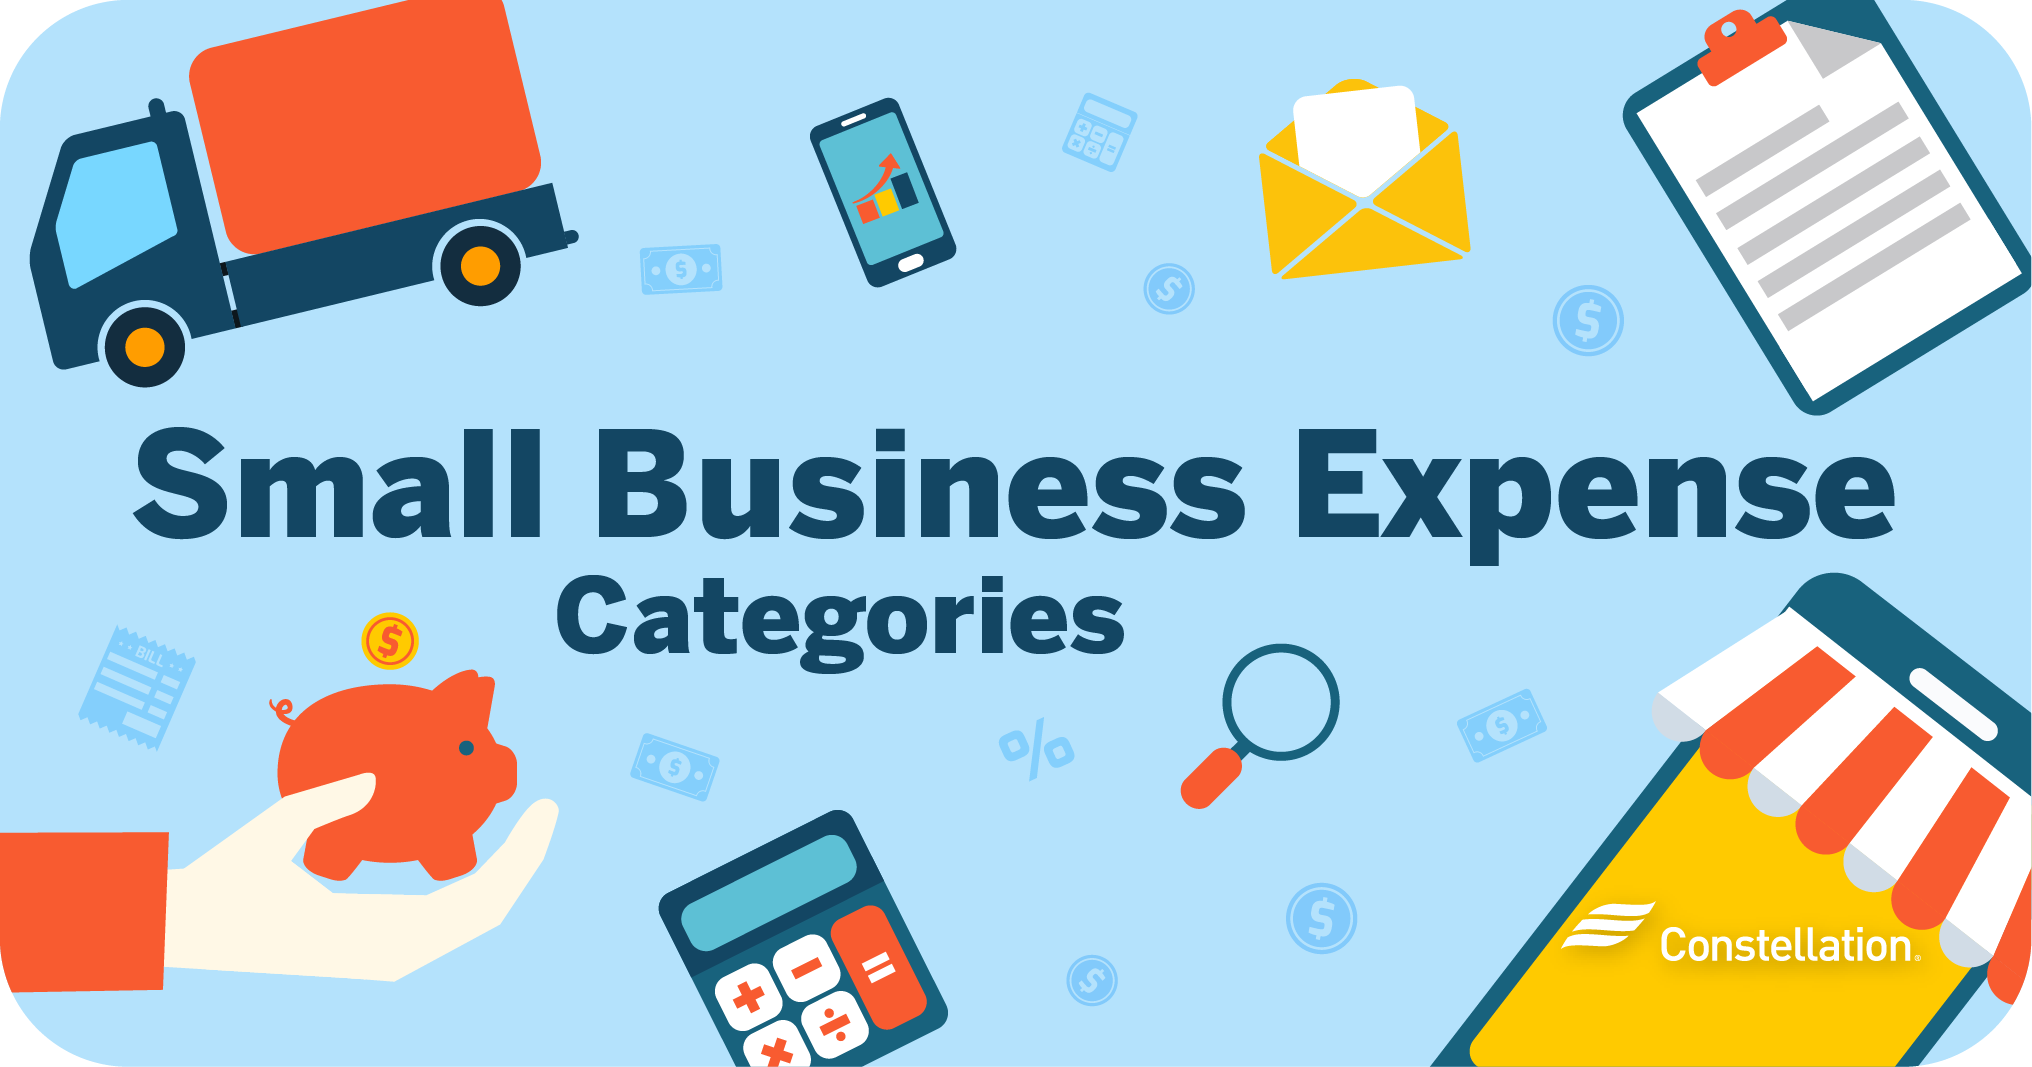 Small business expense categories.